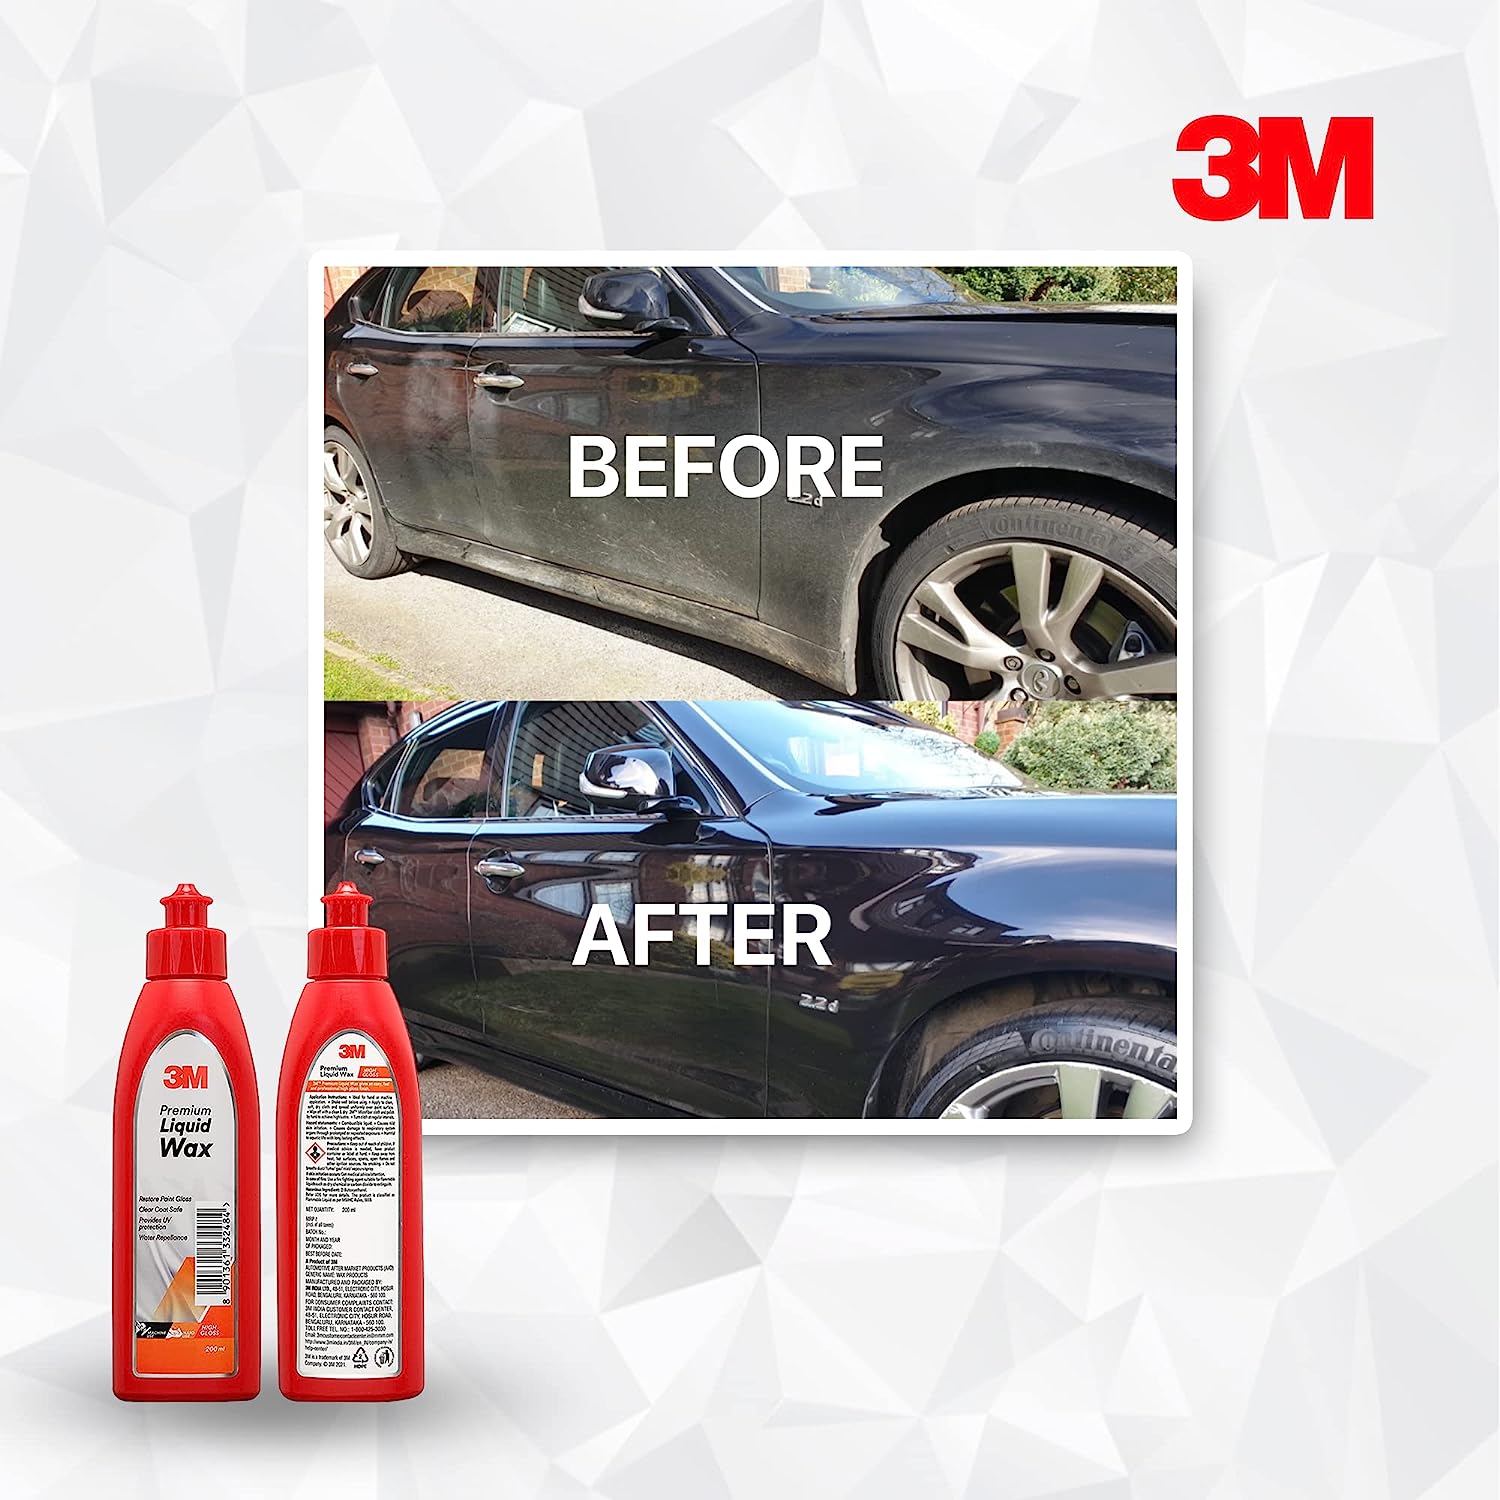 3M Auto Specialty Liquid Wax (200ml) Restores gloss on car paint Water Repellent and UV Protection-Car Accessories-dealsplant